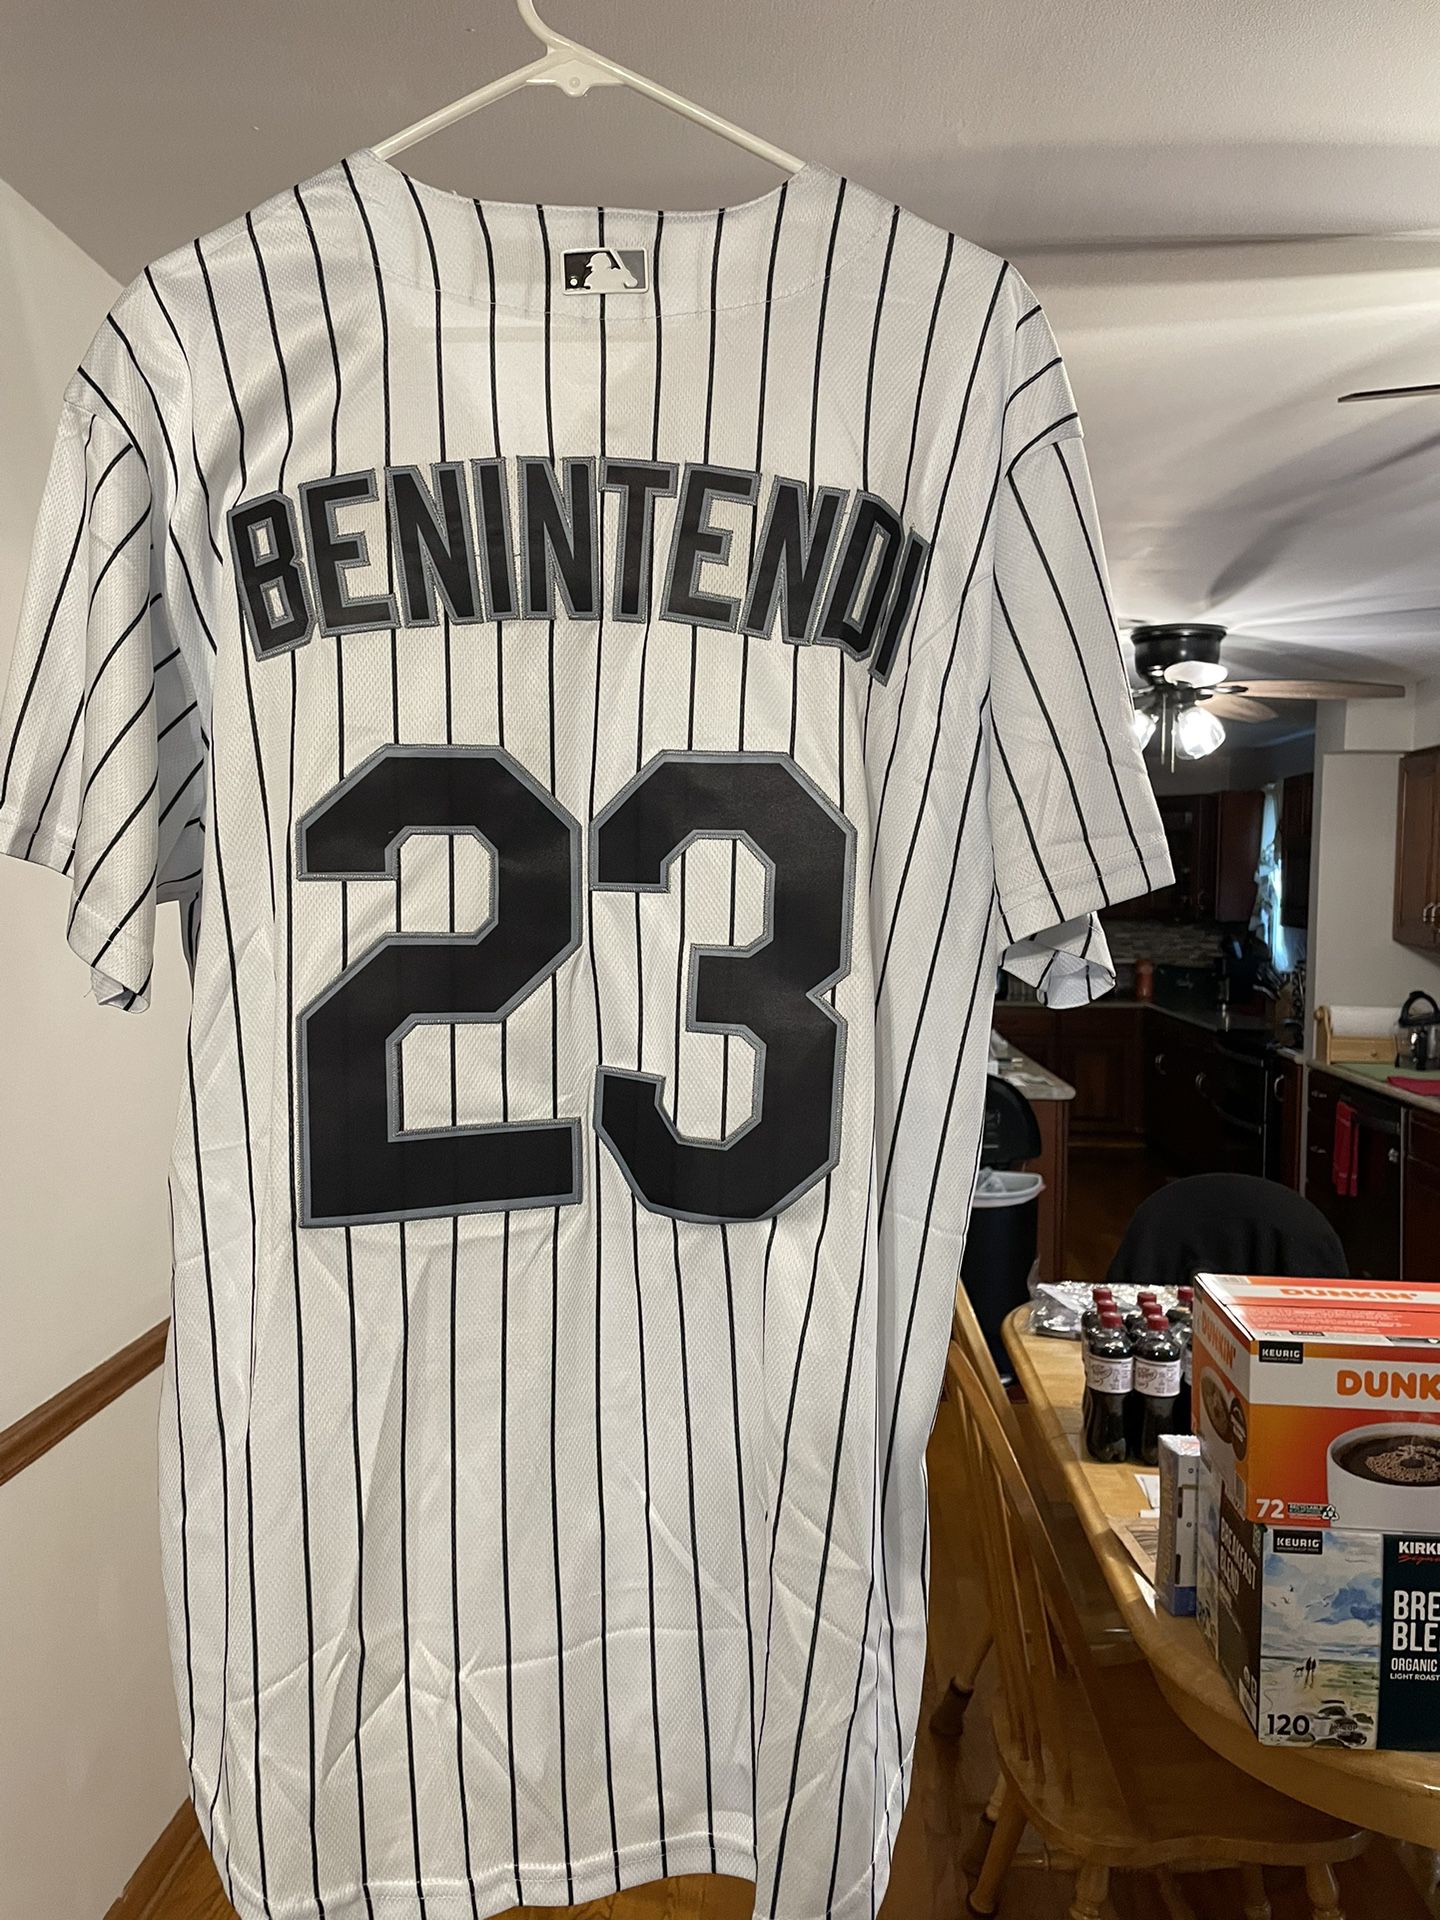 Chicago White Sox Benintendi Jersey Southside Or Black Pinstripes for Sale  in Carol Stream, IL - OfferUp